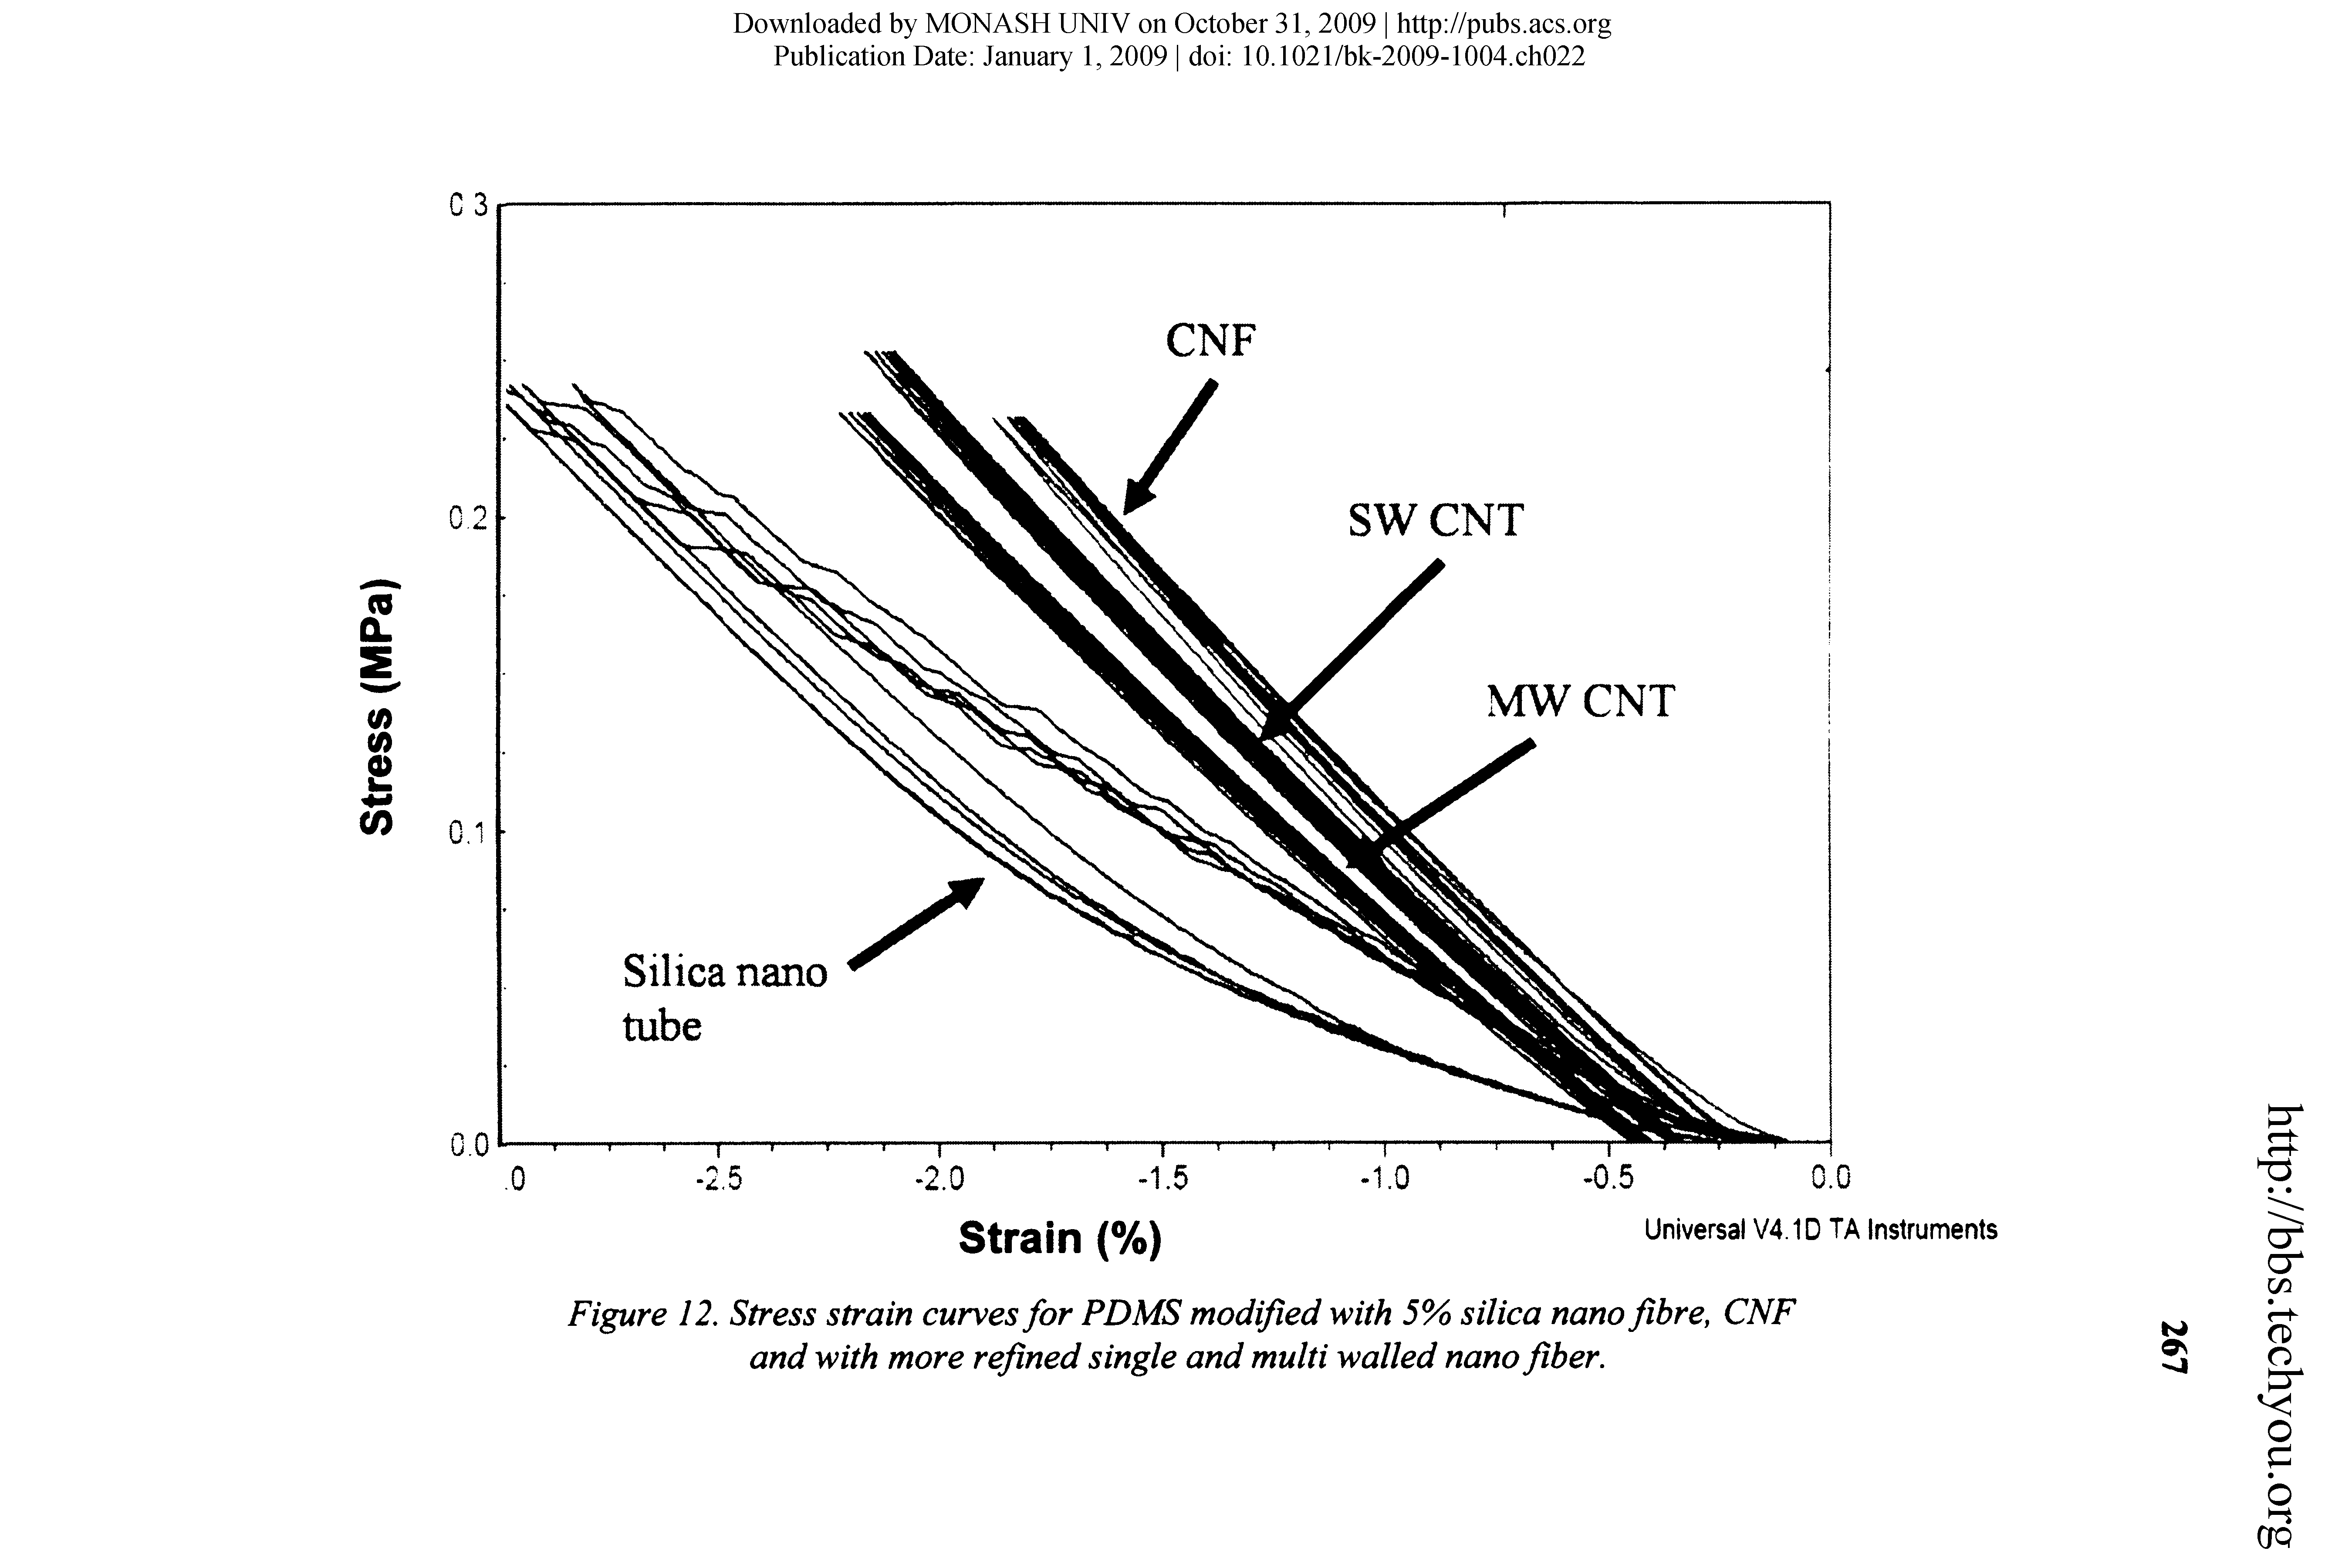 Figure 12. Stress strain curves for PDMS modified with 5% silica nano fibre, CNF and with more refined single and multi walled nano fiber.